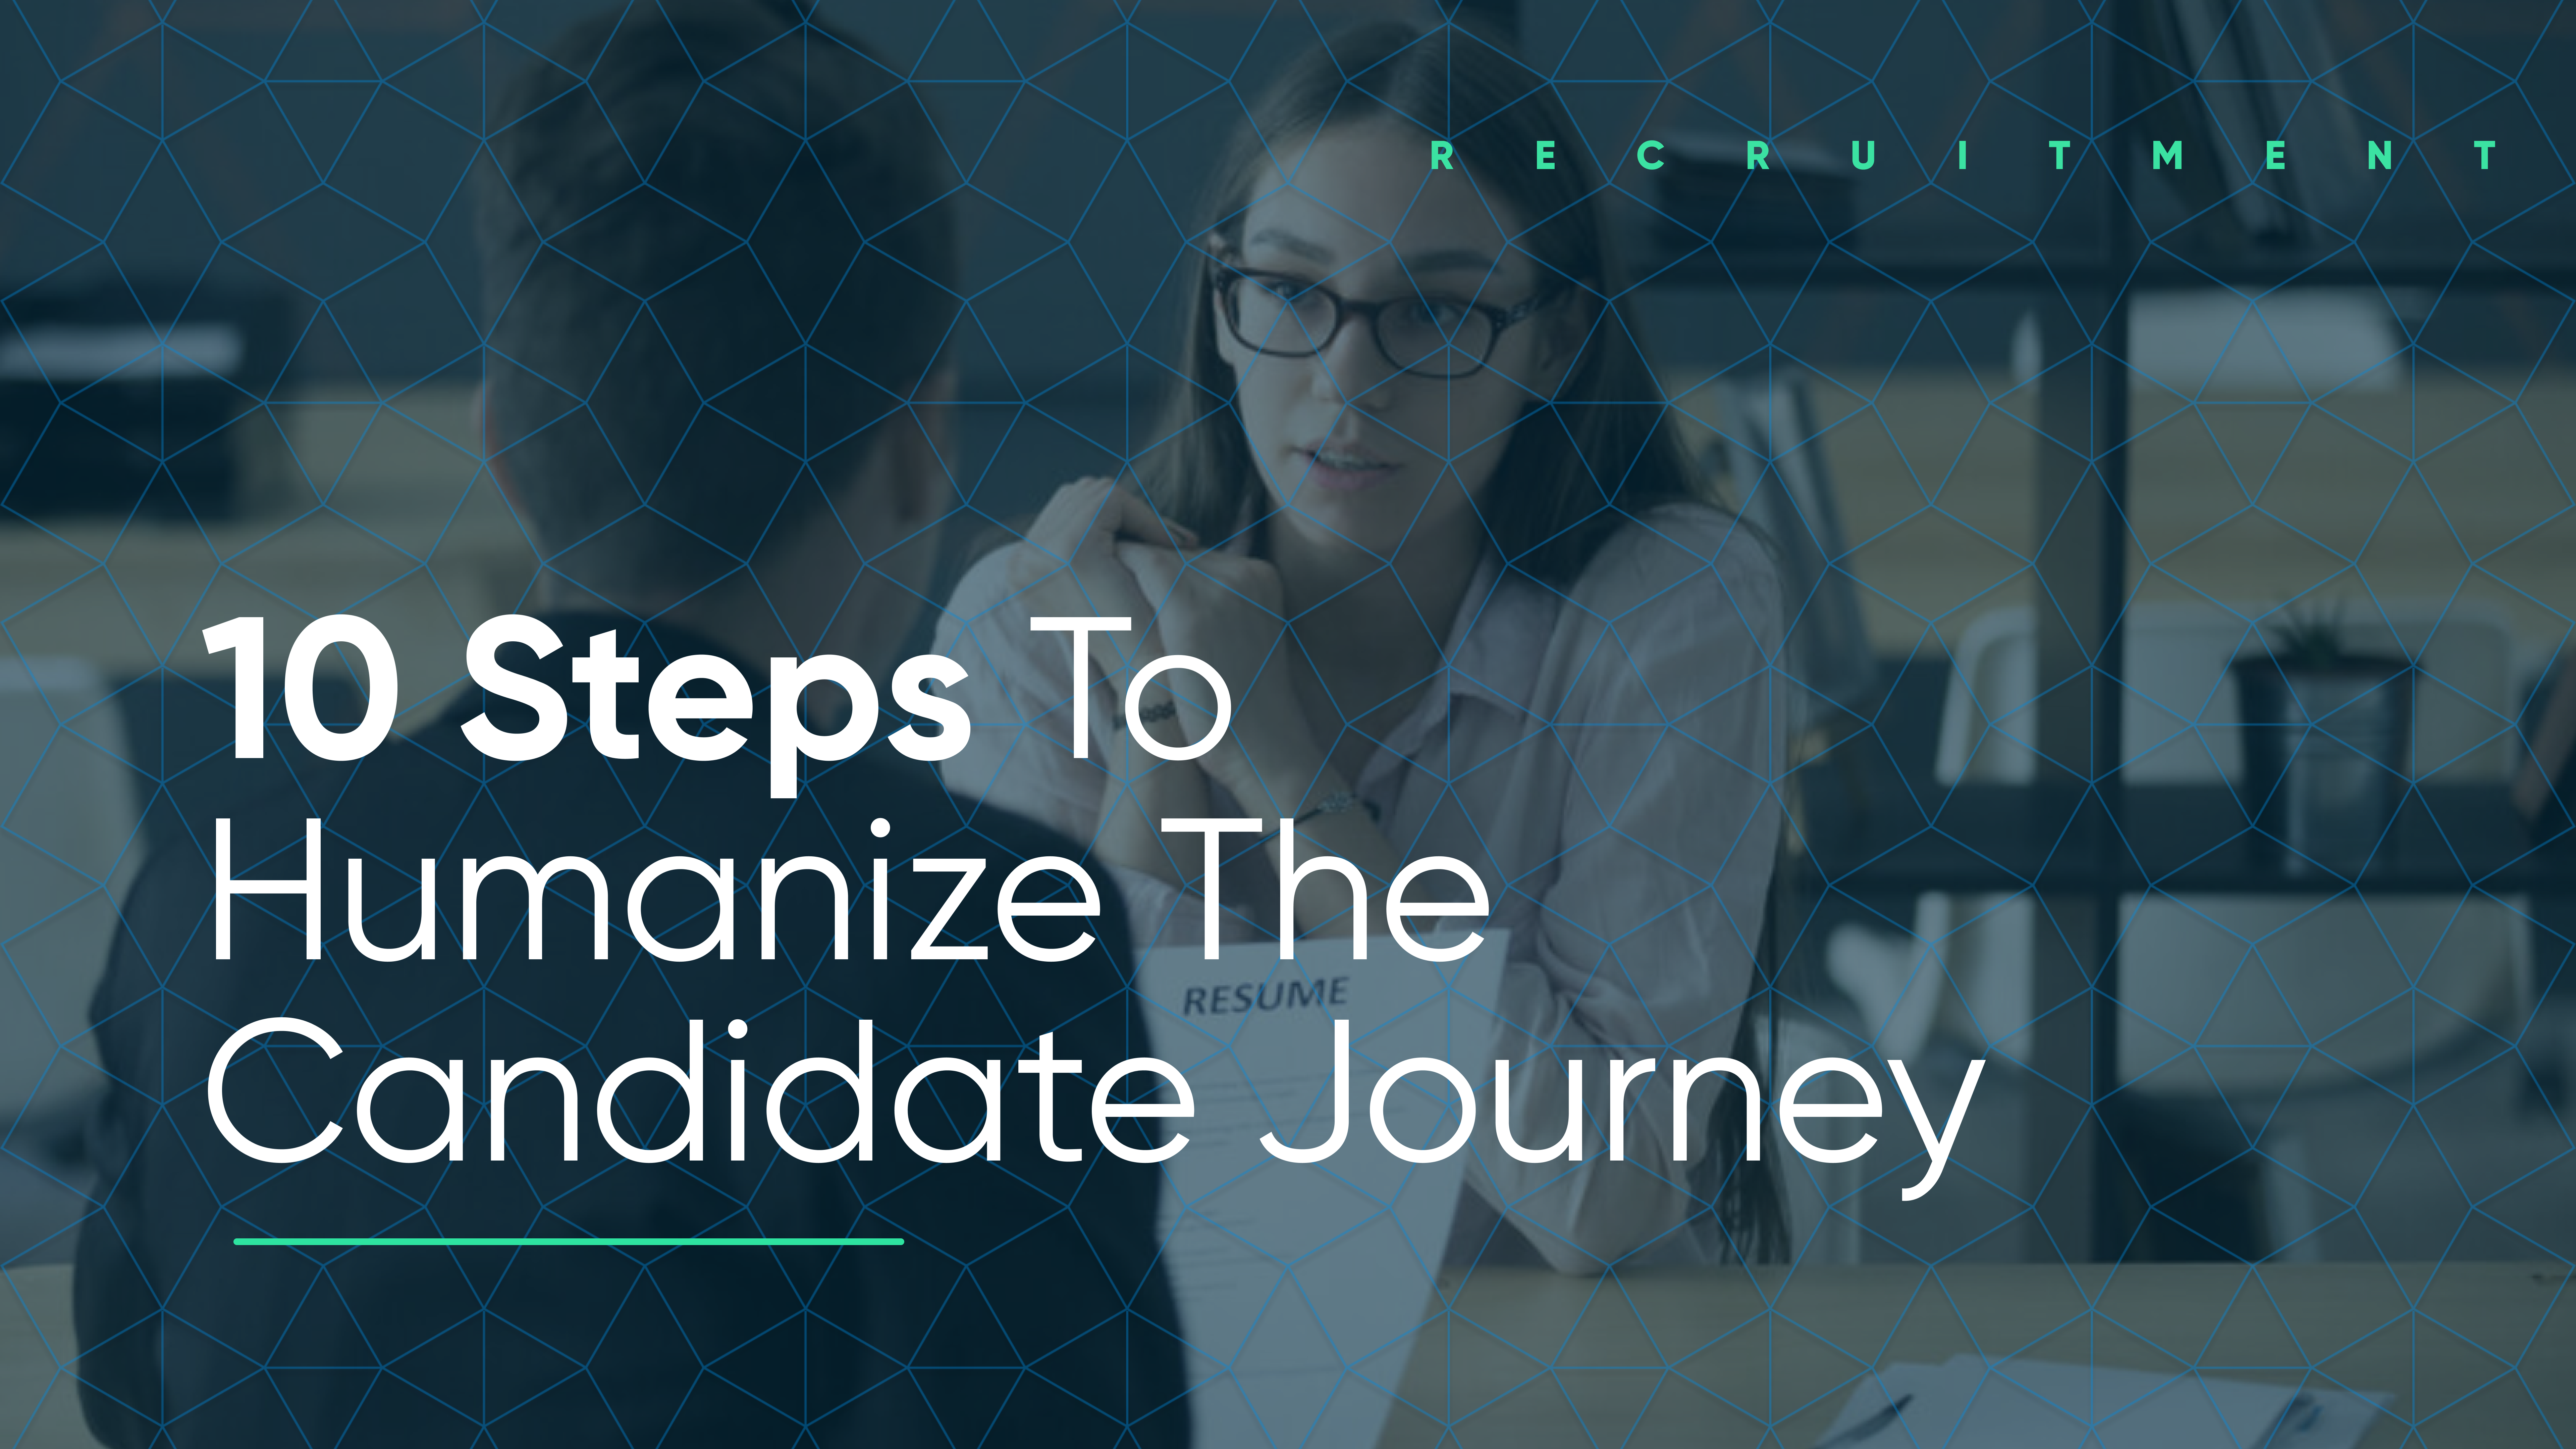 10 Steps to Humanize The Candidate Journey